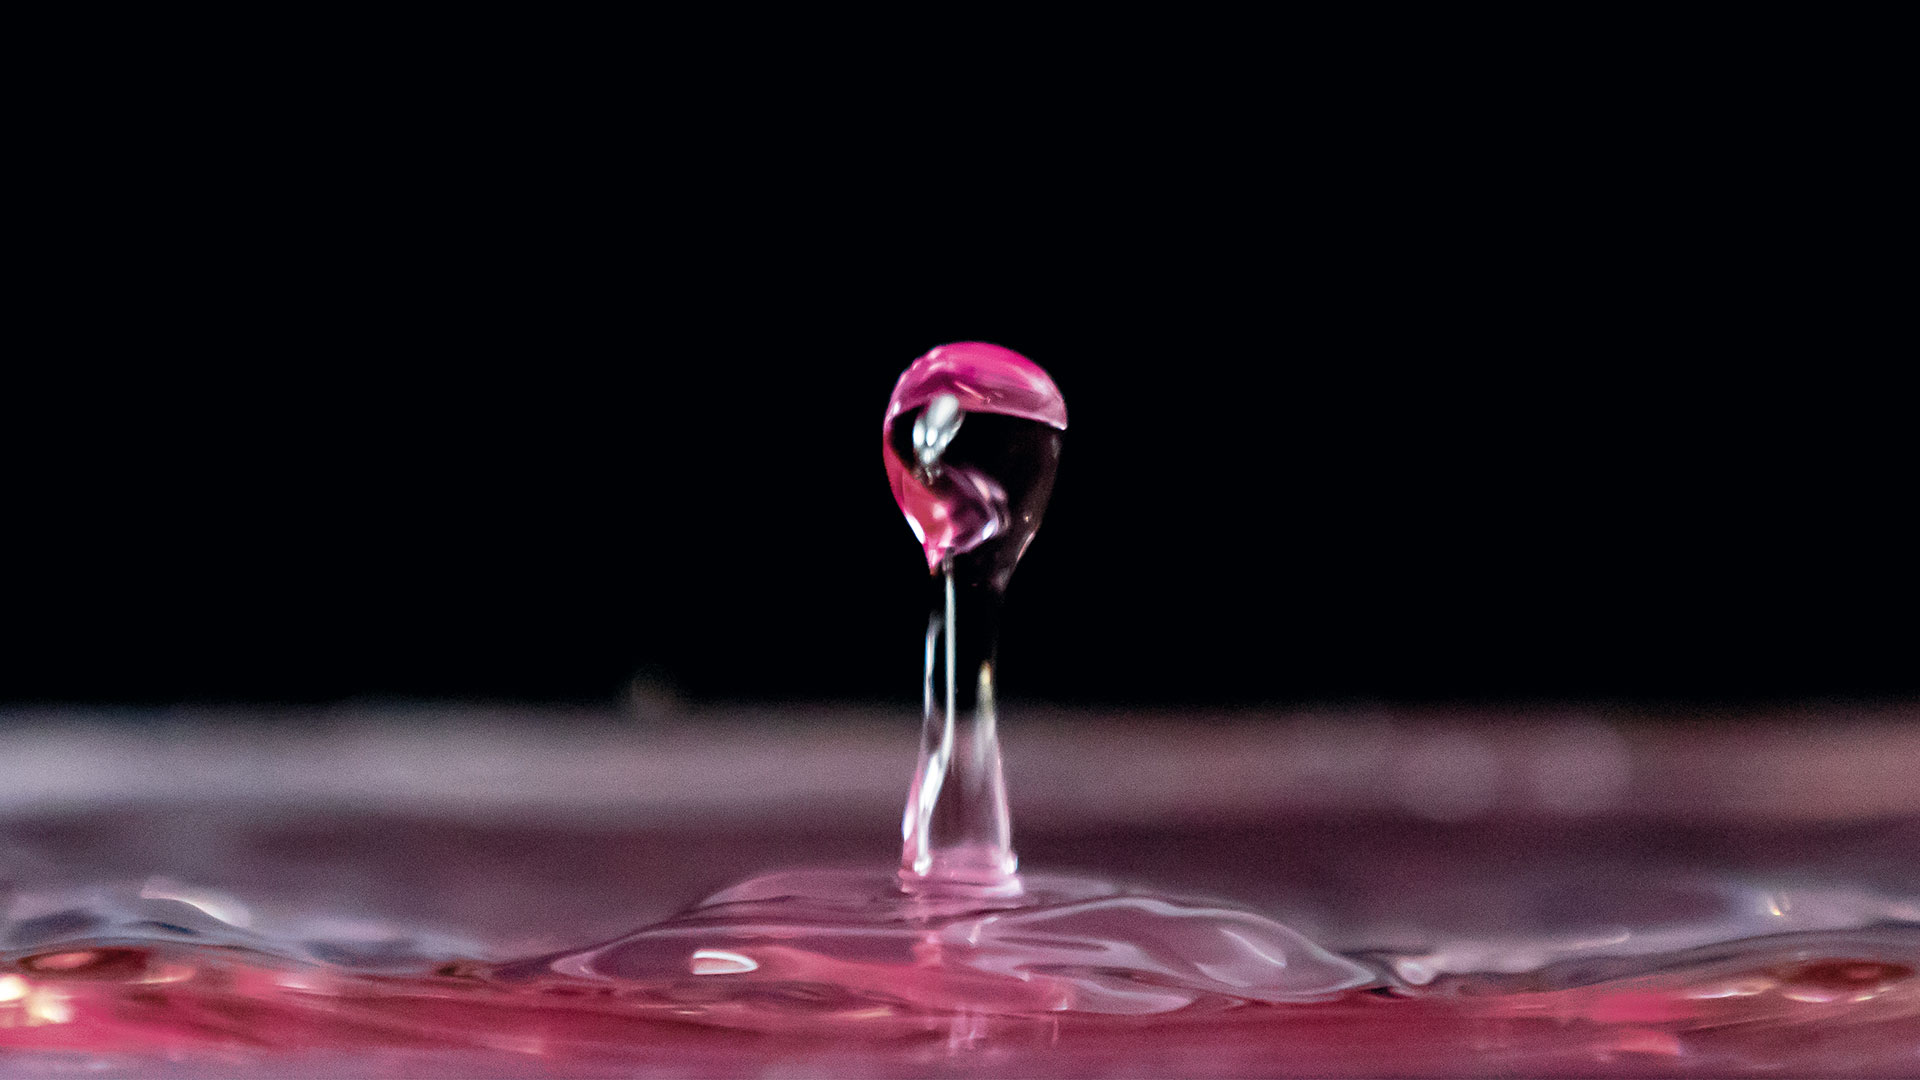 Pink water droplet pinging up after something was dropped into the water